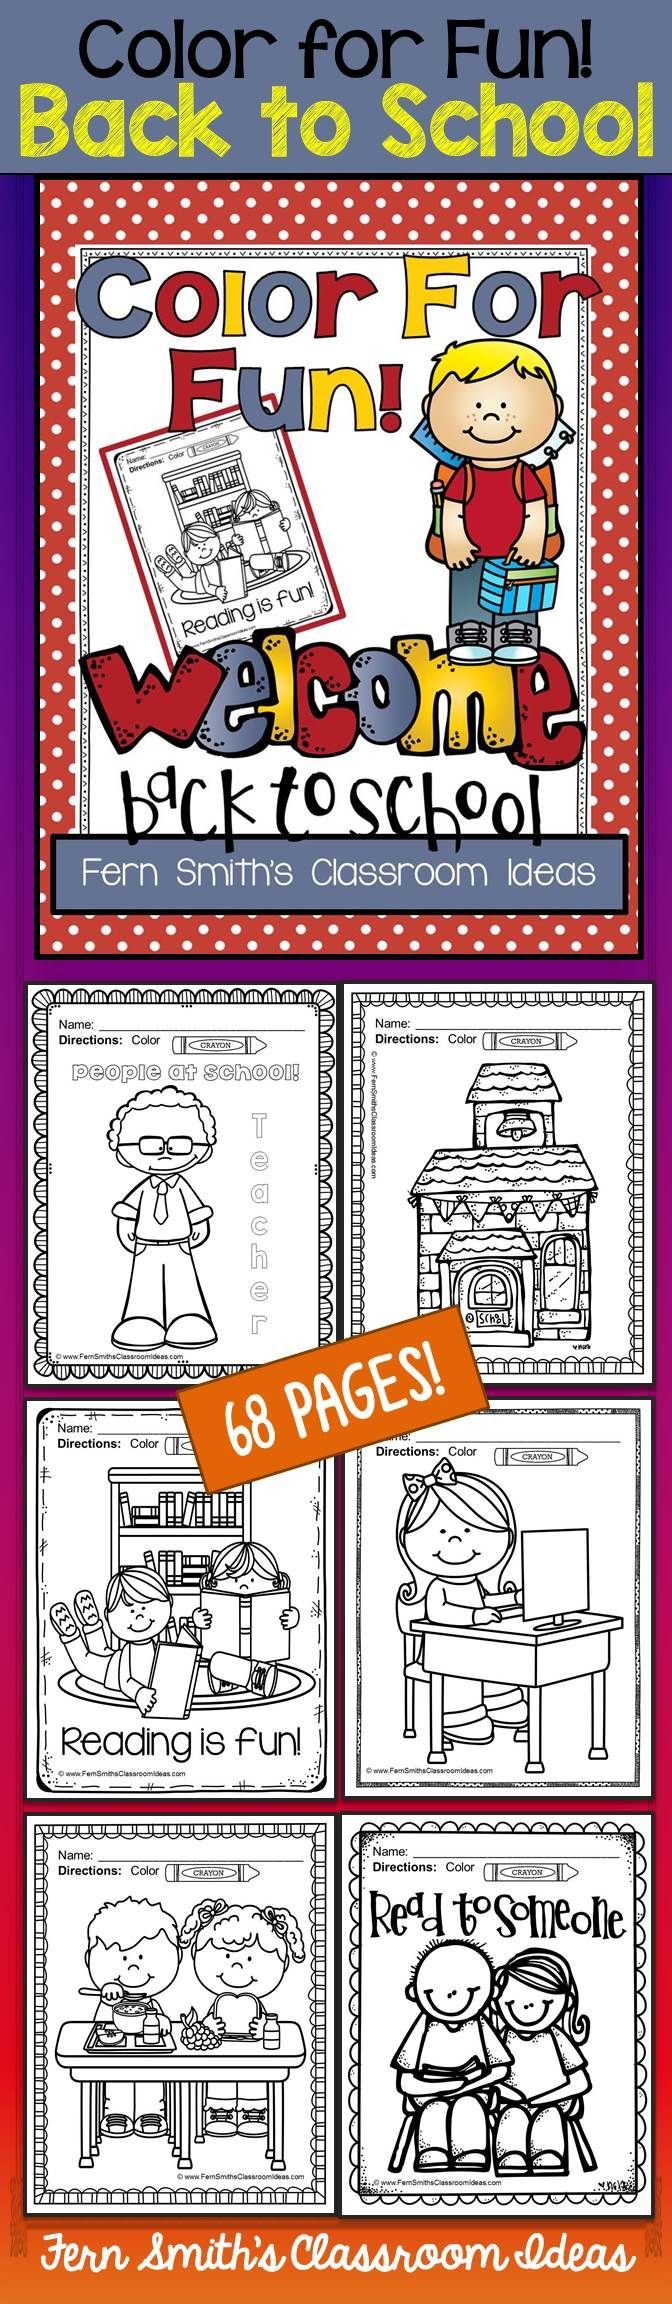 68 Back to School Coloring Pages for your classroom or personal childrens fun